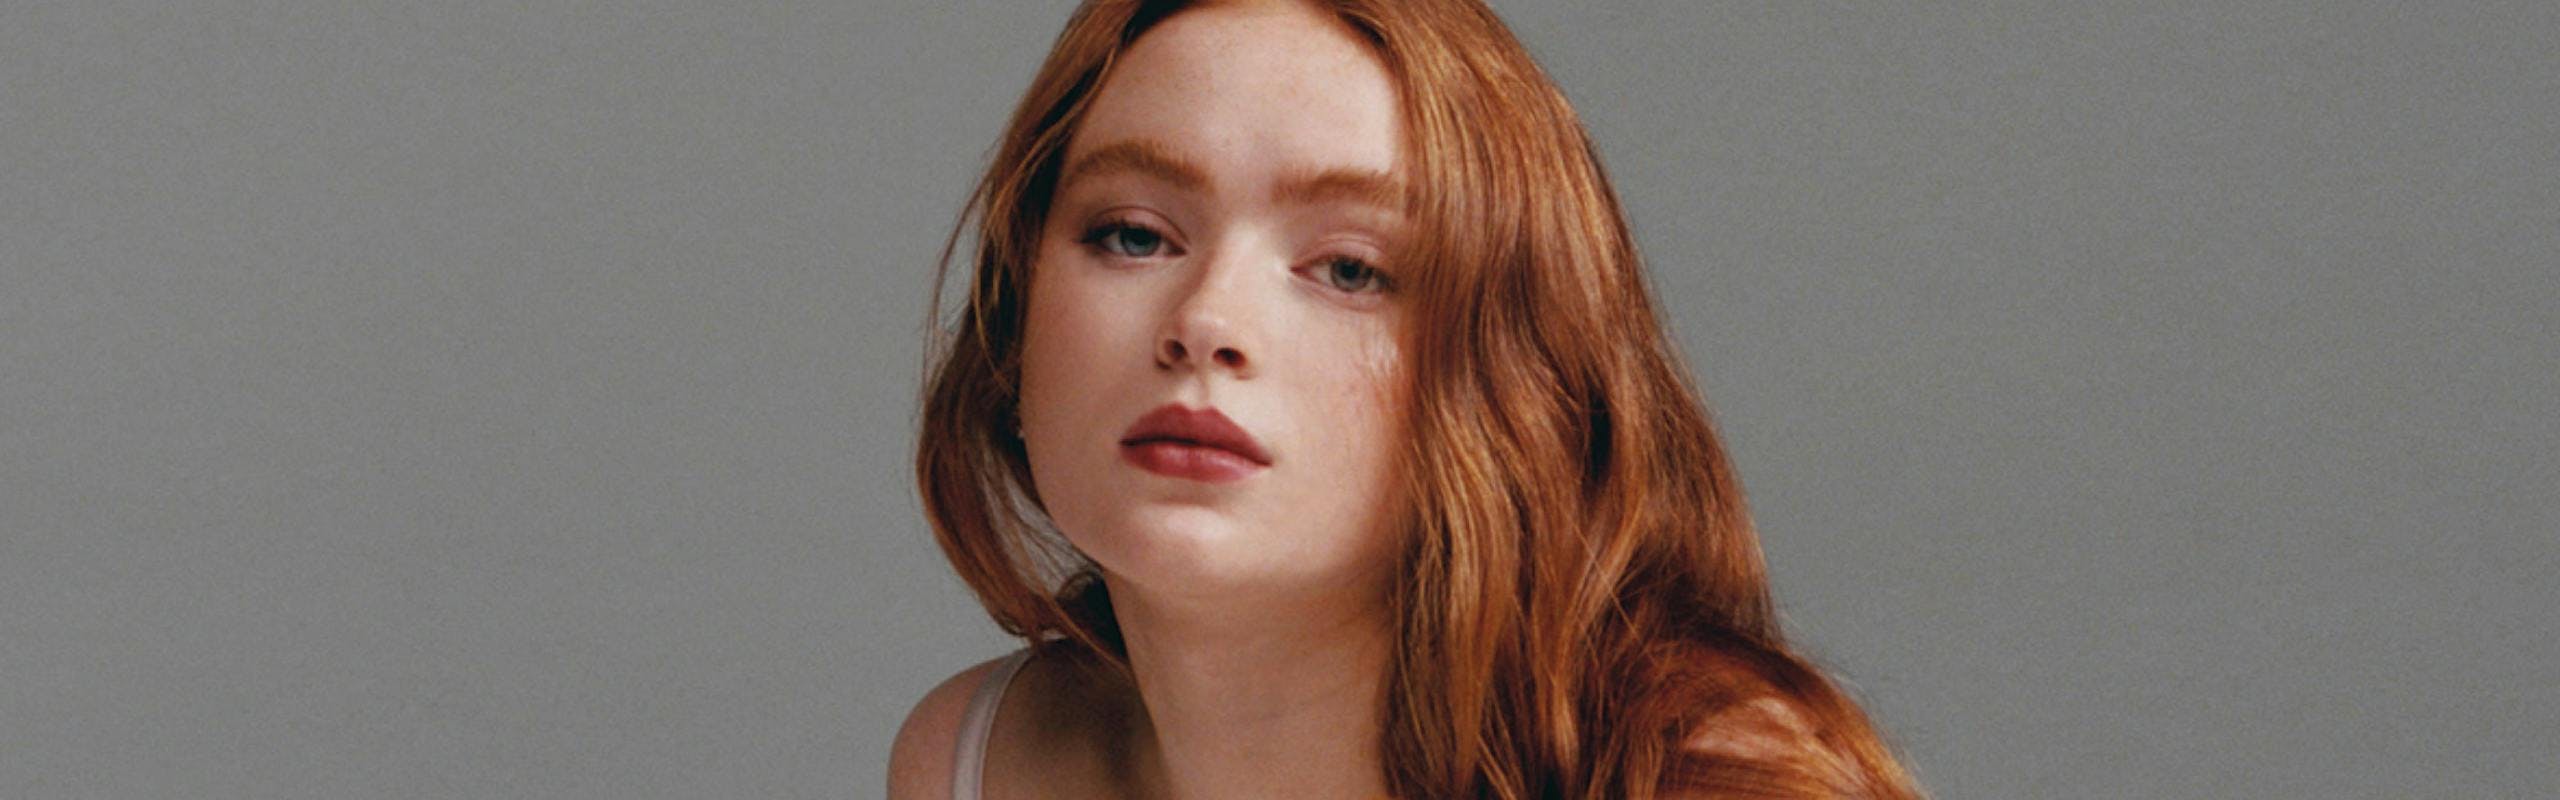 Sadie Sink red hair cream dress gray and white backdrop